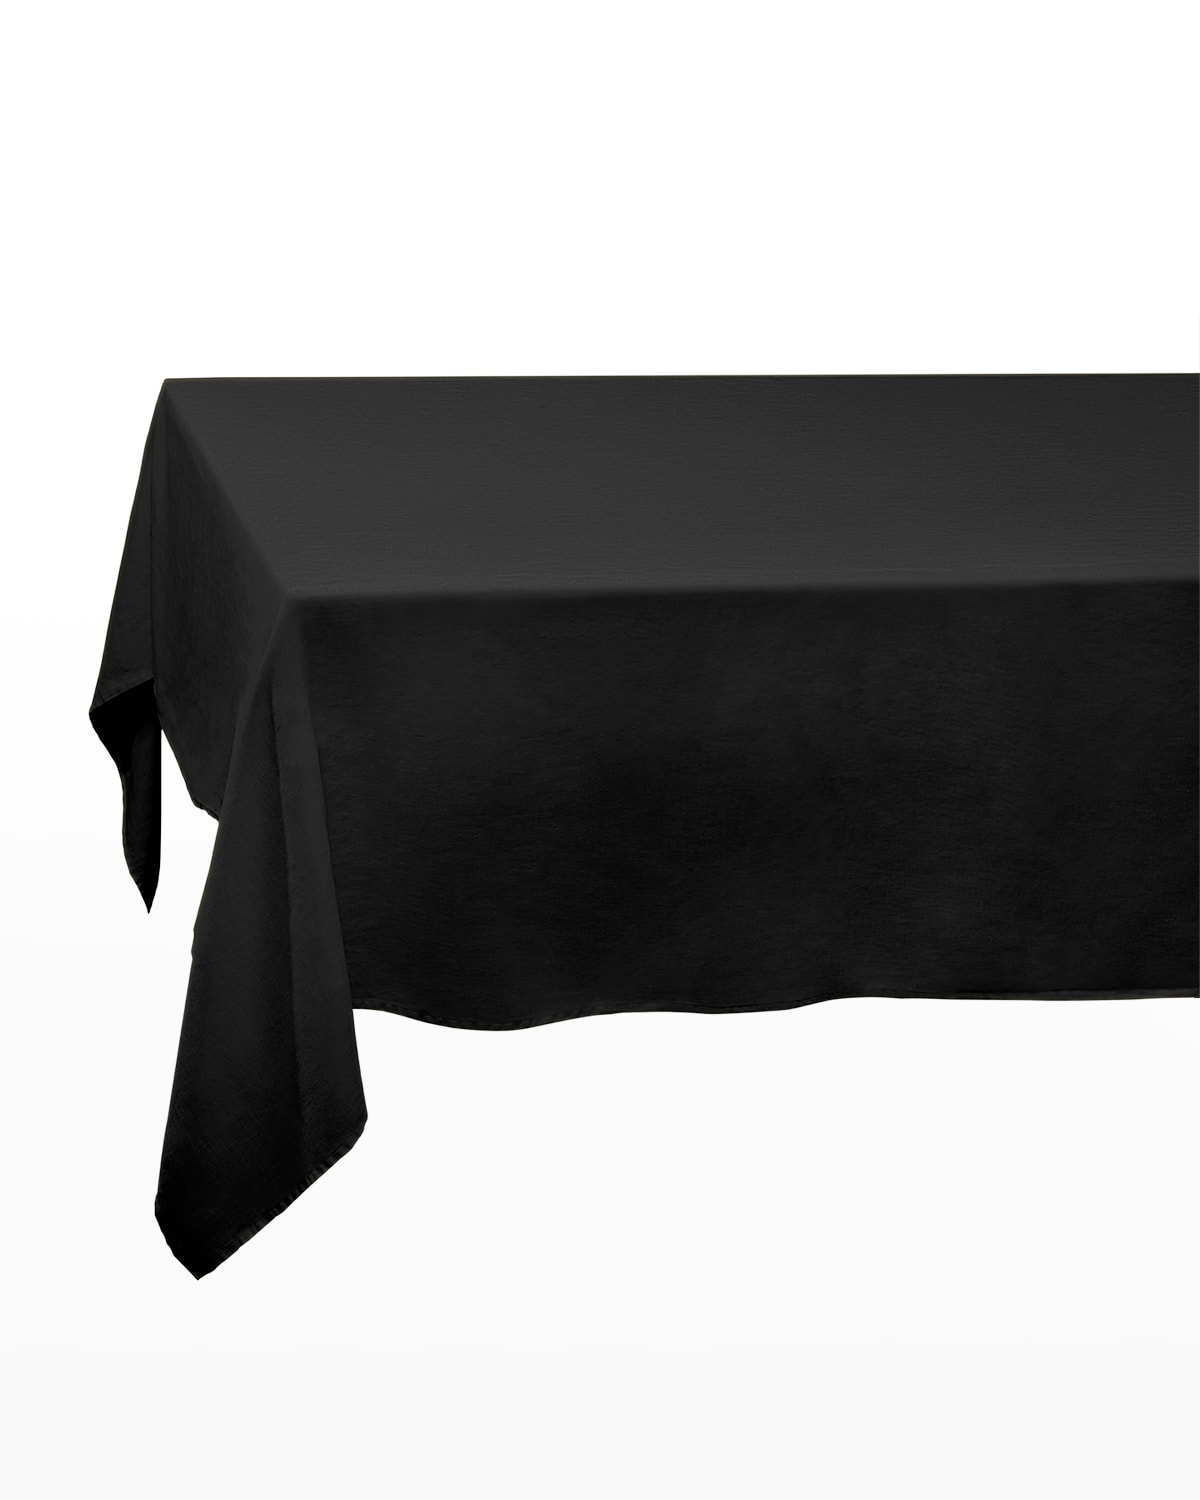 L'OBJET CONCORDE SATEEN TABLECLOTH, LARGE, 76" X 126"